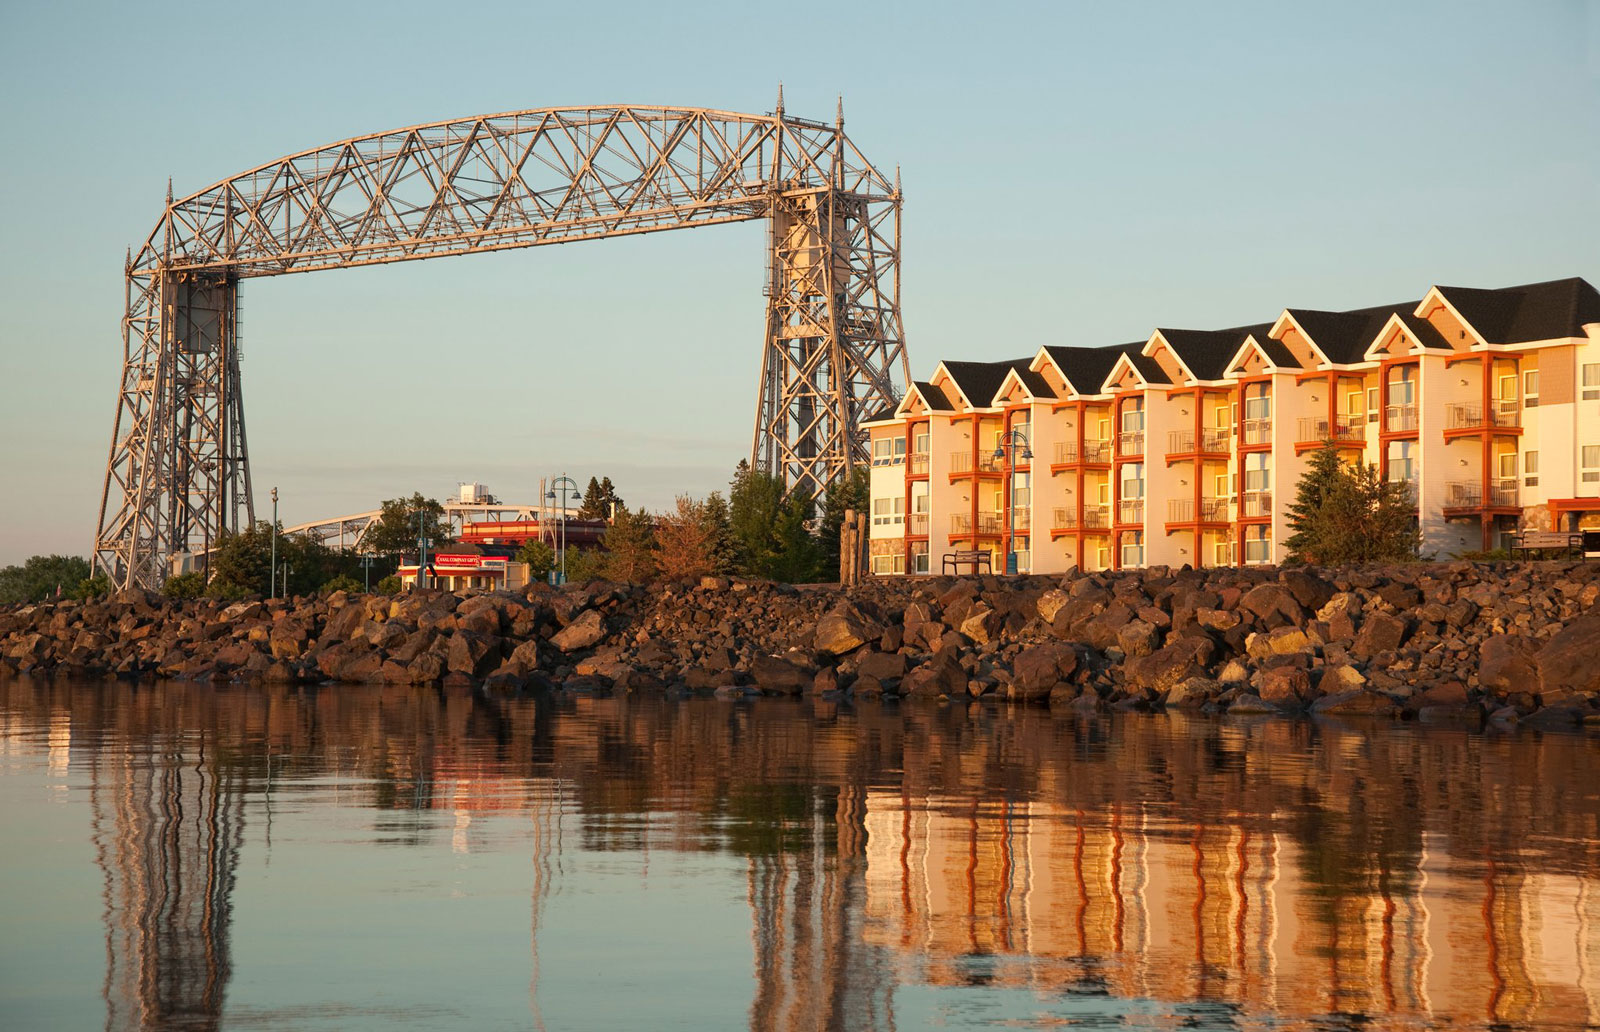 A view of the Aerial Lift Bridge in Duluth, MN with the sunrise hitting the glass-like water and the rocky shoreline.